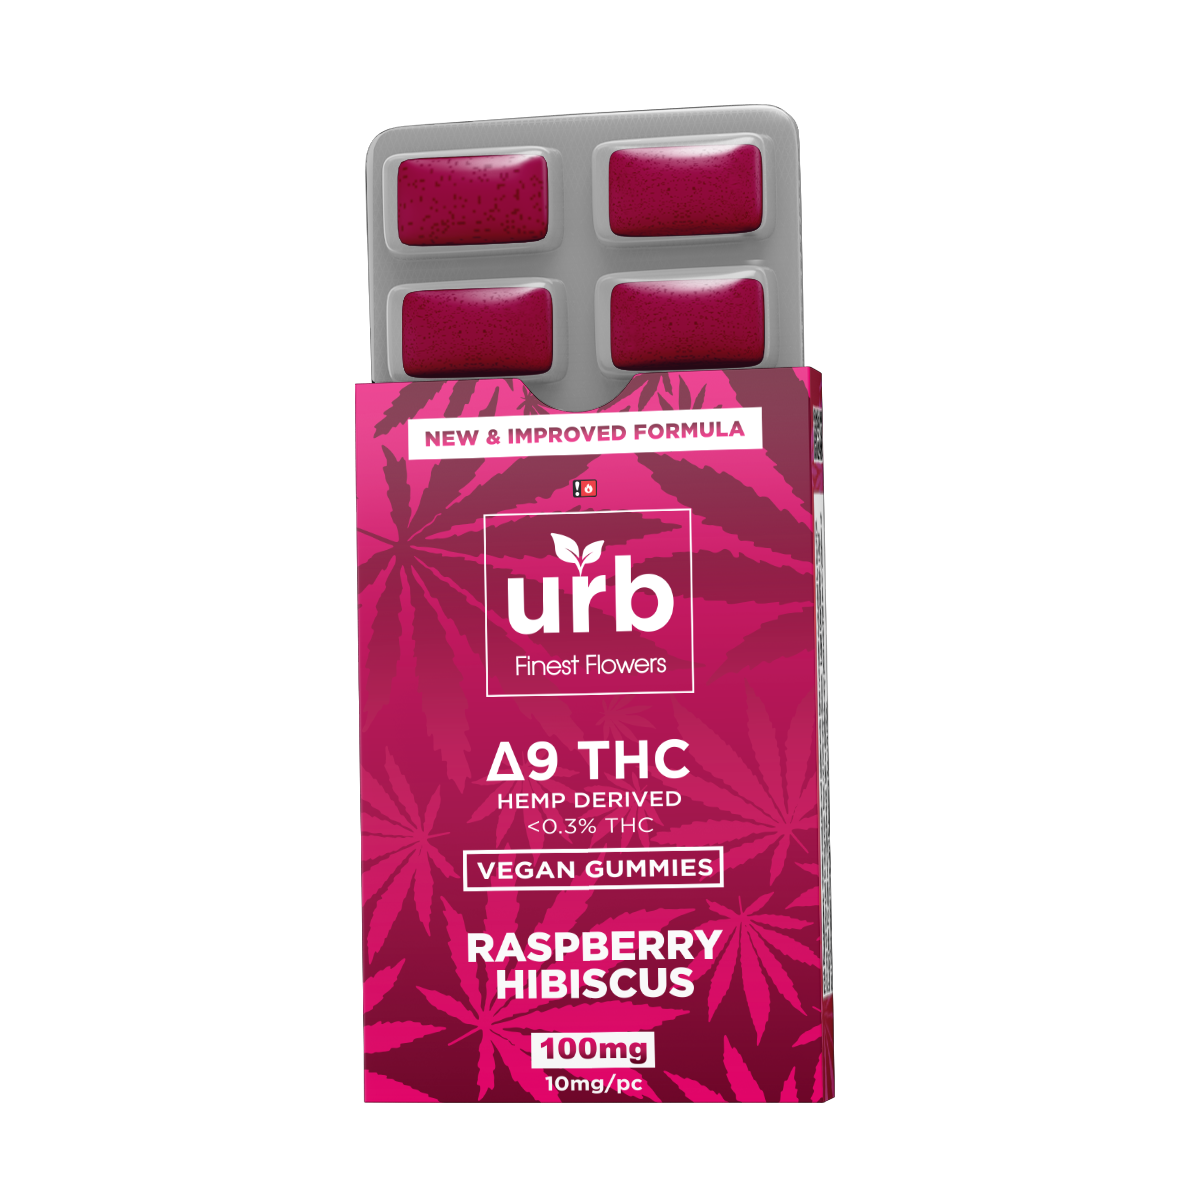 NEW Urb Delta 9 THC Gummies 100MG Blister Pack yoga smokes yoga studio, delivery, delivery near me, yoga smokes smoke shop, find smoke shop, head shop near me, yoga studio, headshop, head shop, local smoke shop, psl, psl smoke shop, smoke shop, smokeshop, yoga, yoga studio, dispensary, local dispensary, smokeshop near me, port saint lucie, florida, port st lucie, lounge, life, highlife, love, stoned, highsociety. Yoga Smokes Raspberry Hibiscus